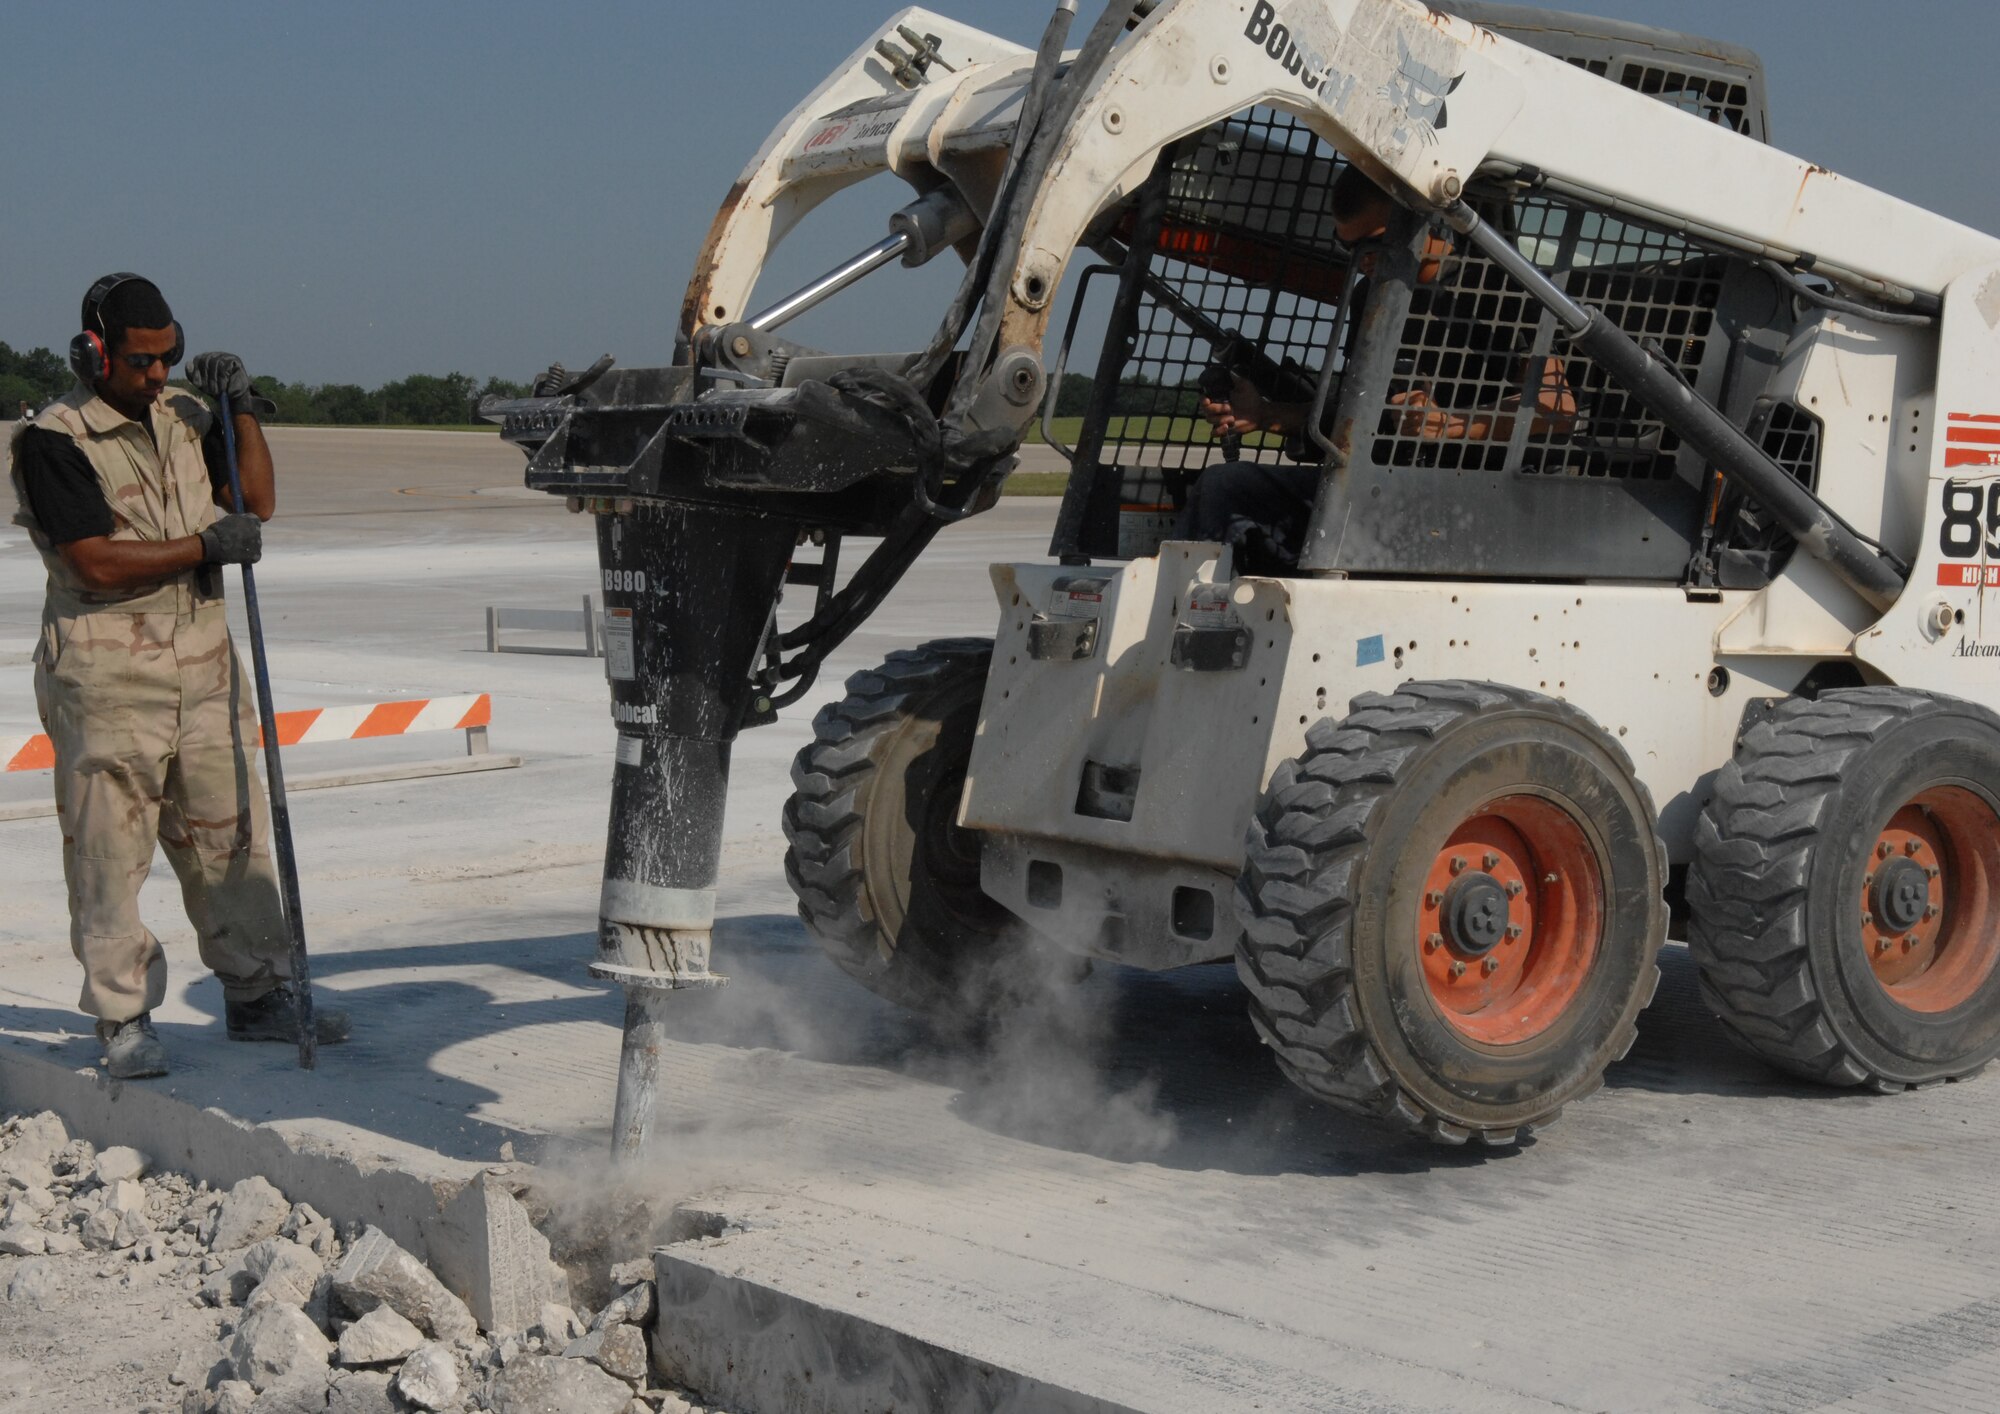 WHITEMAN AIR FORCE BASE, Mo. -- Staff Sgt. Derek Phillips, 823rd RED HORSE Squadron, stands by as Senior Airman Zachary Norris, 823rd RHS, uses a Bobcat to demolish a concrete slab. (U.S. Air Force photo/Staff Sgt. Jason Barebo)